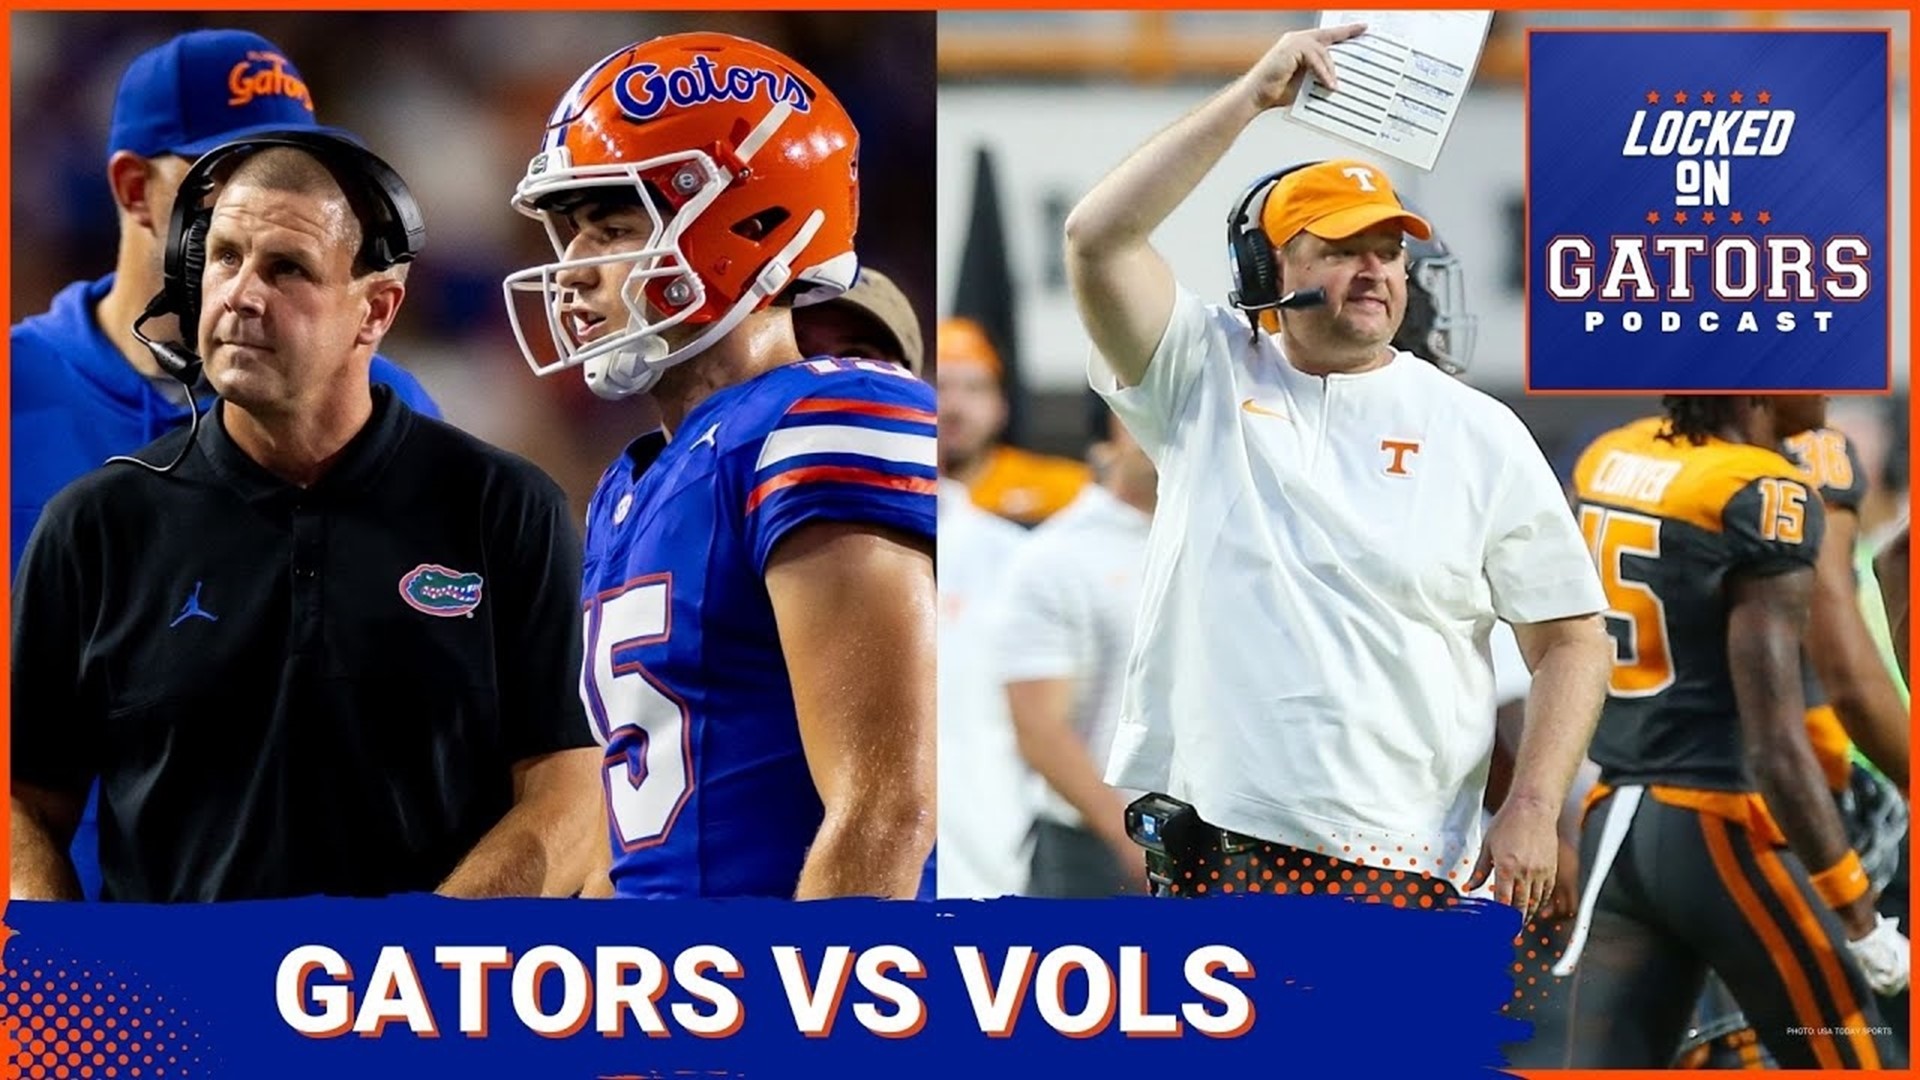 Welcome back to Locked On Gators! On today's episode, we're gearing up for a crucial SEC matchup between the Florida Gators and the Tennessee Volunteers.